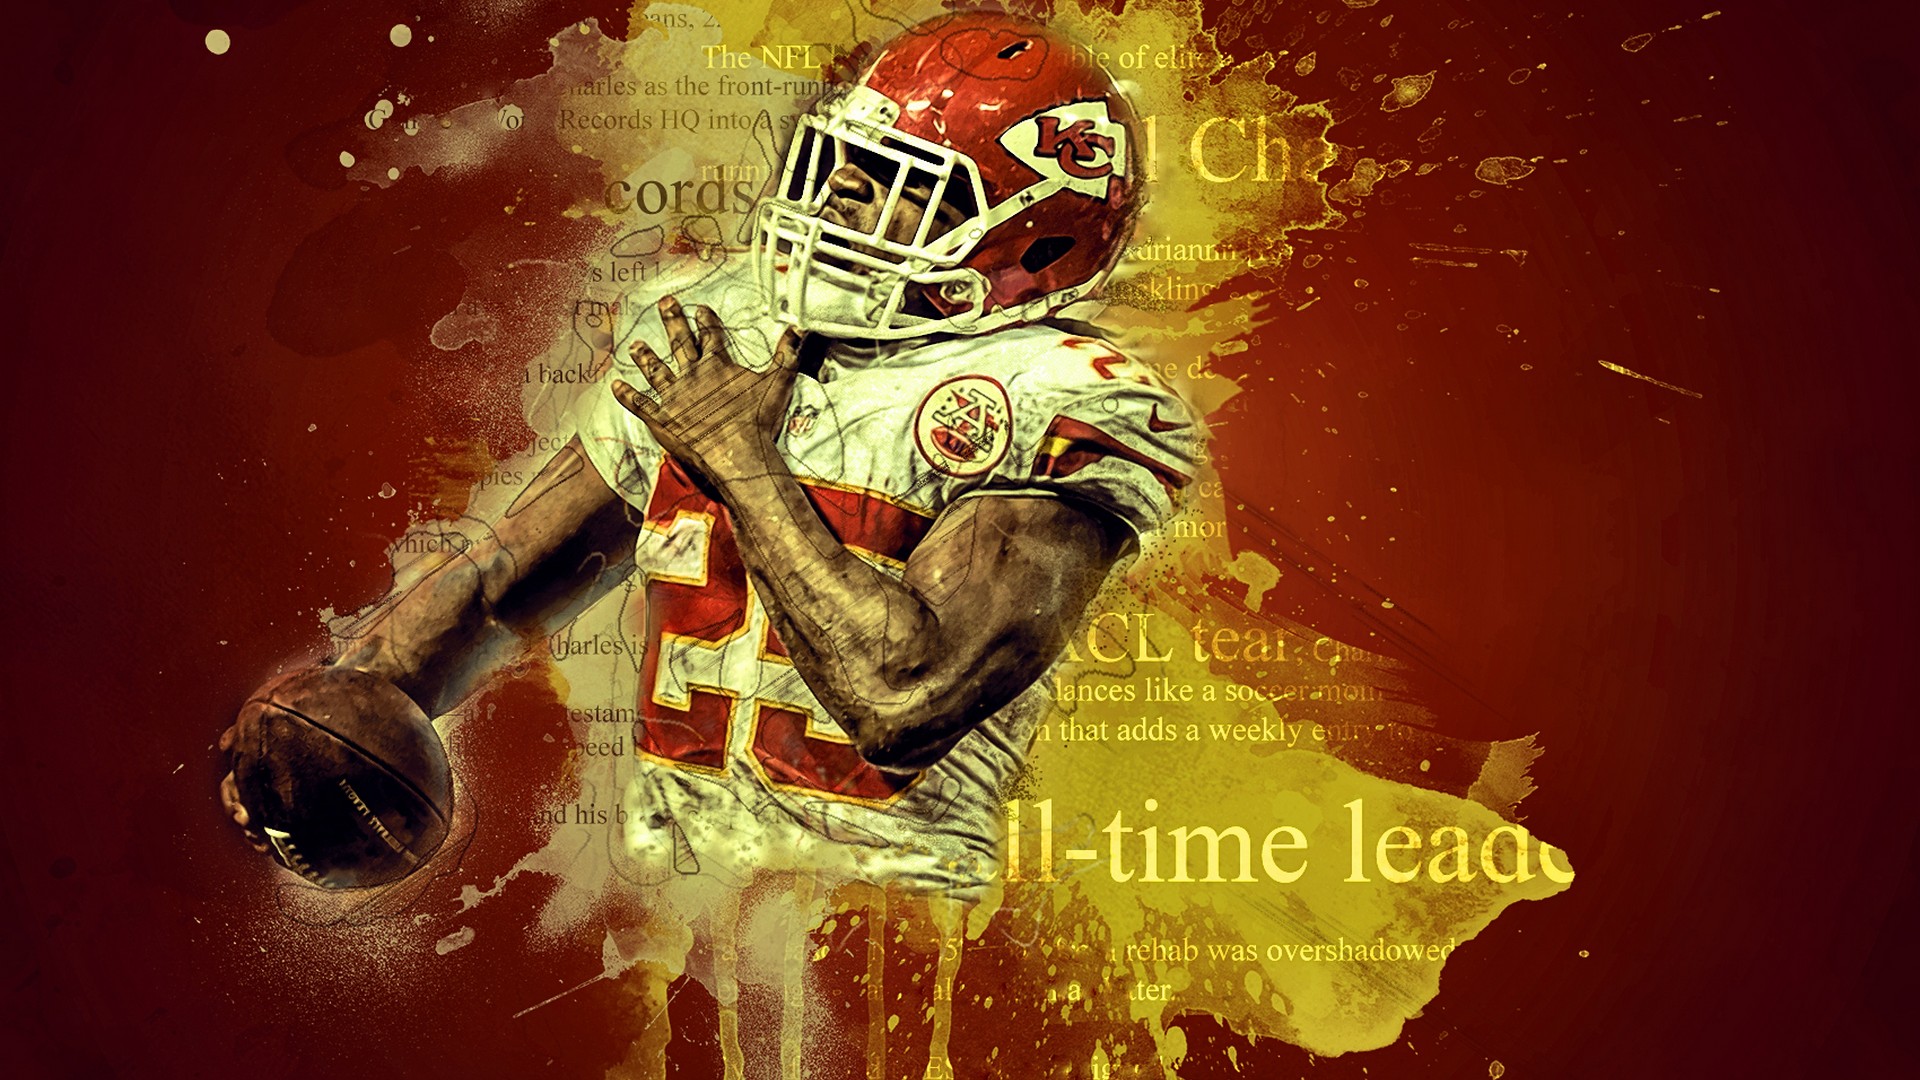 Windows Wallpaper Kansas City Chiefs NFL with high-resolution 1920x1080 pixel. You can use this wallpaper for your Mac or Windows Desktop Background, iPhone, Android or Tablet and another Smartphone device